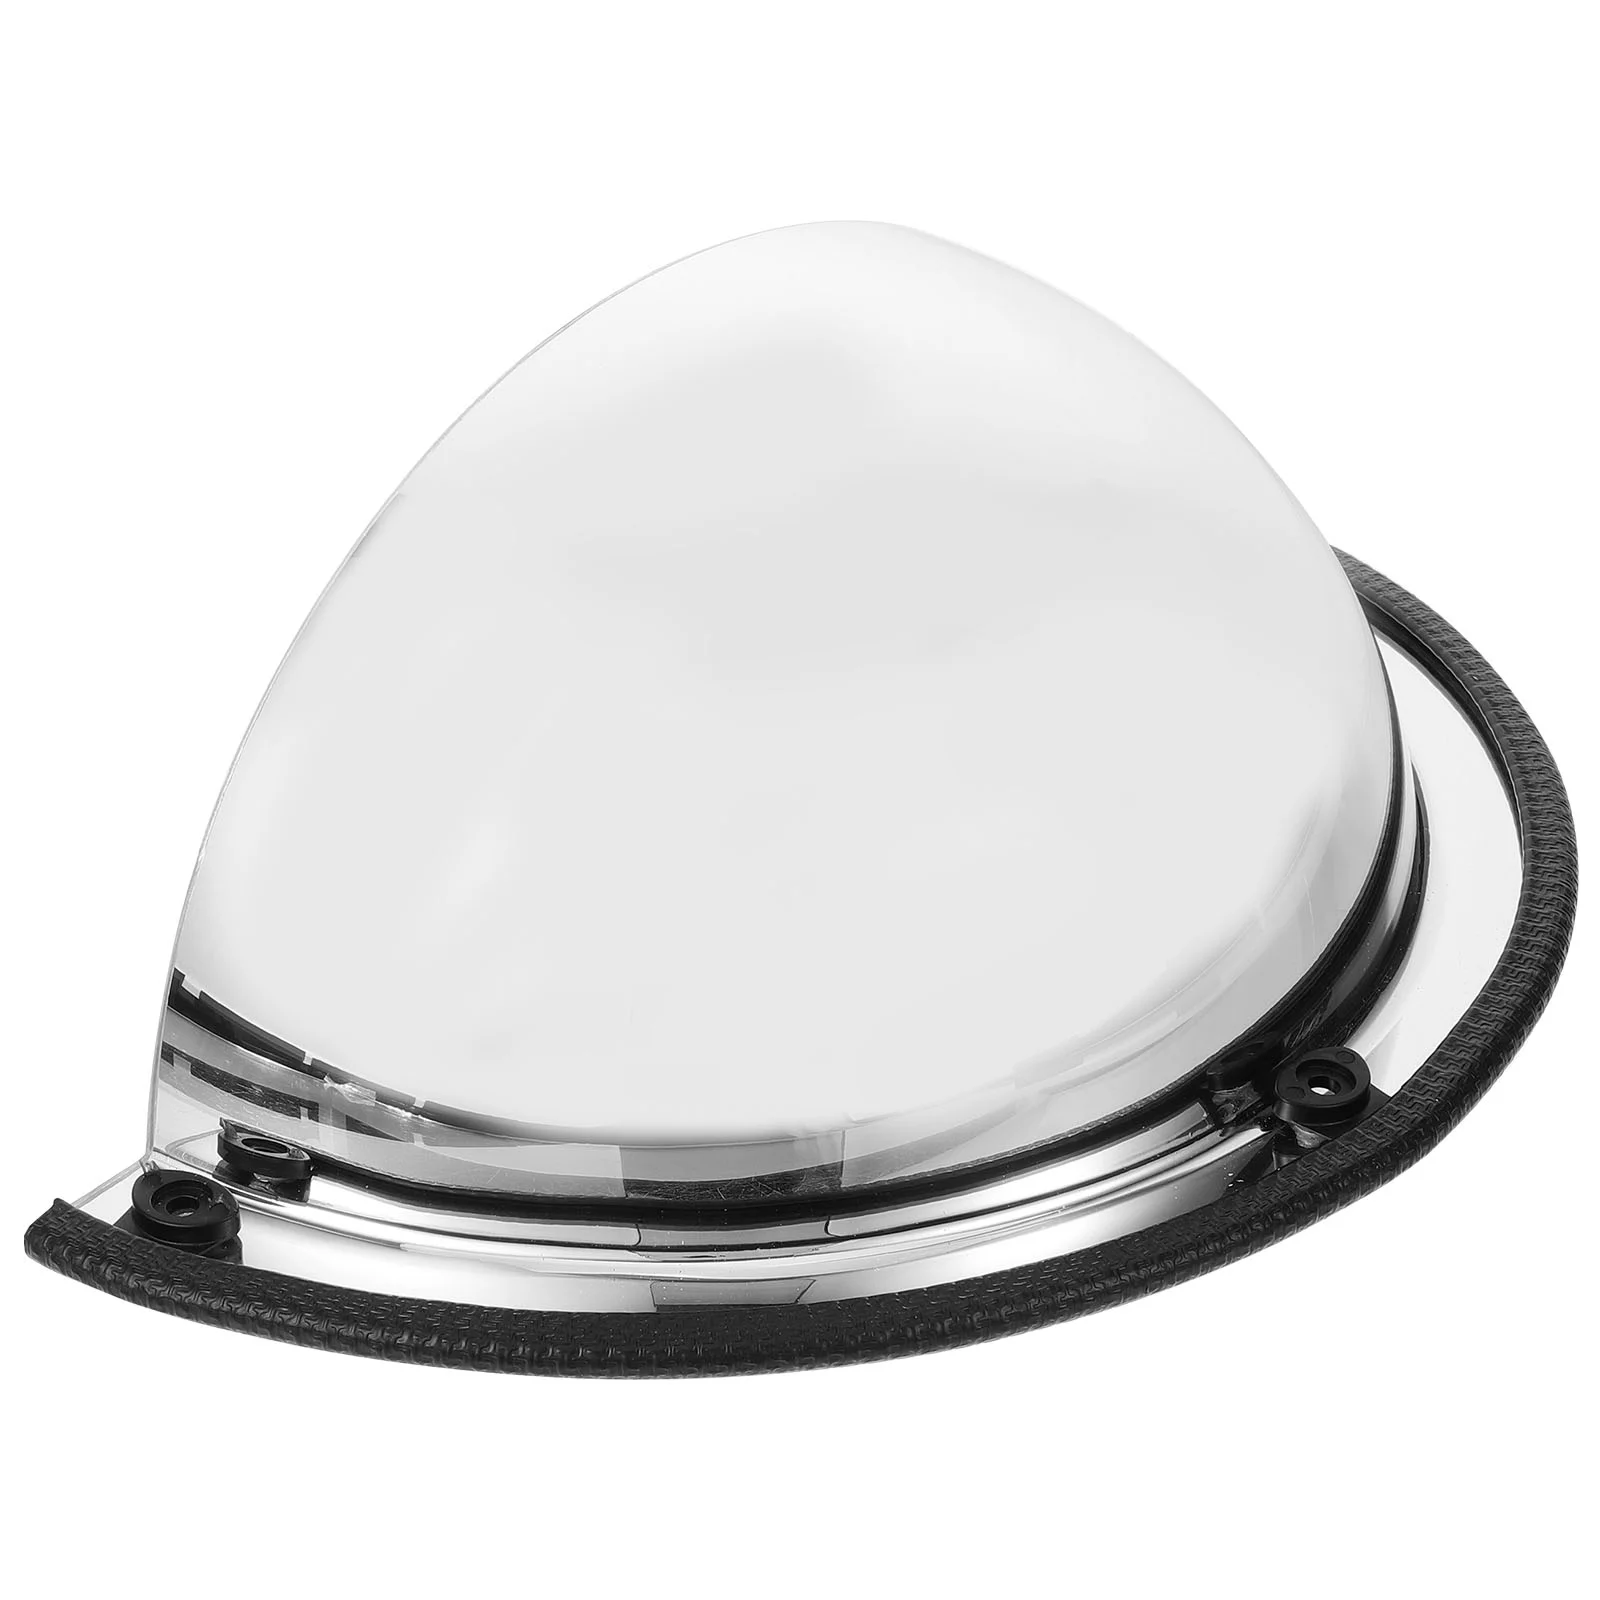 

Security Convex Mirror Safety Mirrors Garage Acrylic Wide-angle Outdoor Corner Traffic Lens Anti-theft